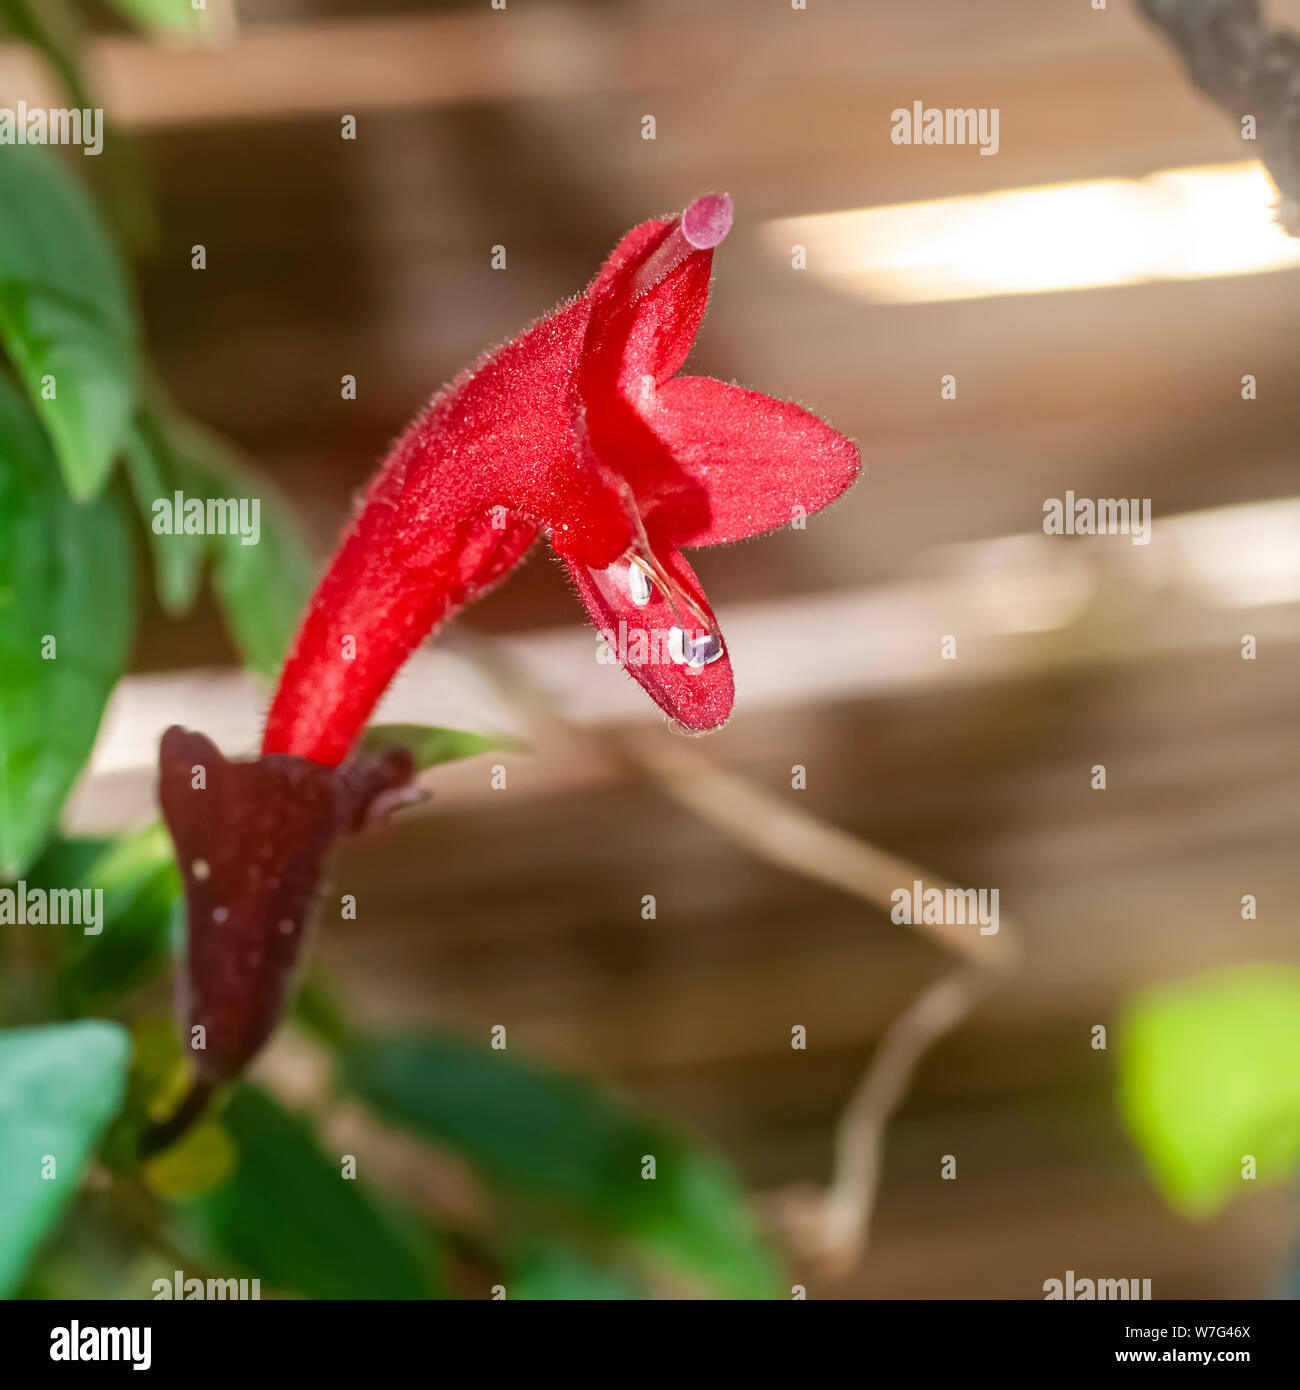 Close up of Red flower on a succulent plant Aeschynanthus (var Mona Lisa) Aeschynanthus is a genus of about 150 species of evergreen subtropical plant Stock Photo